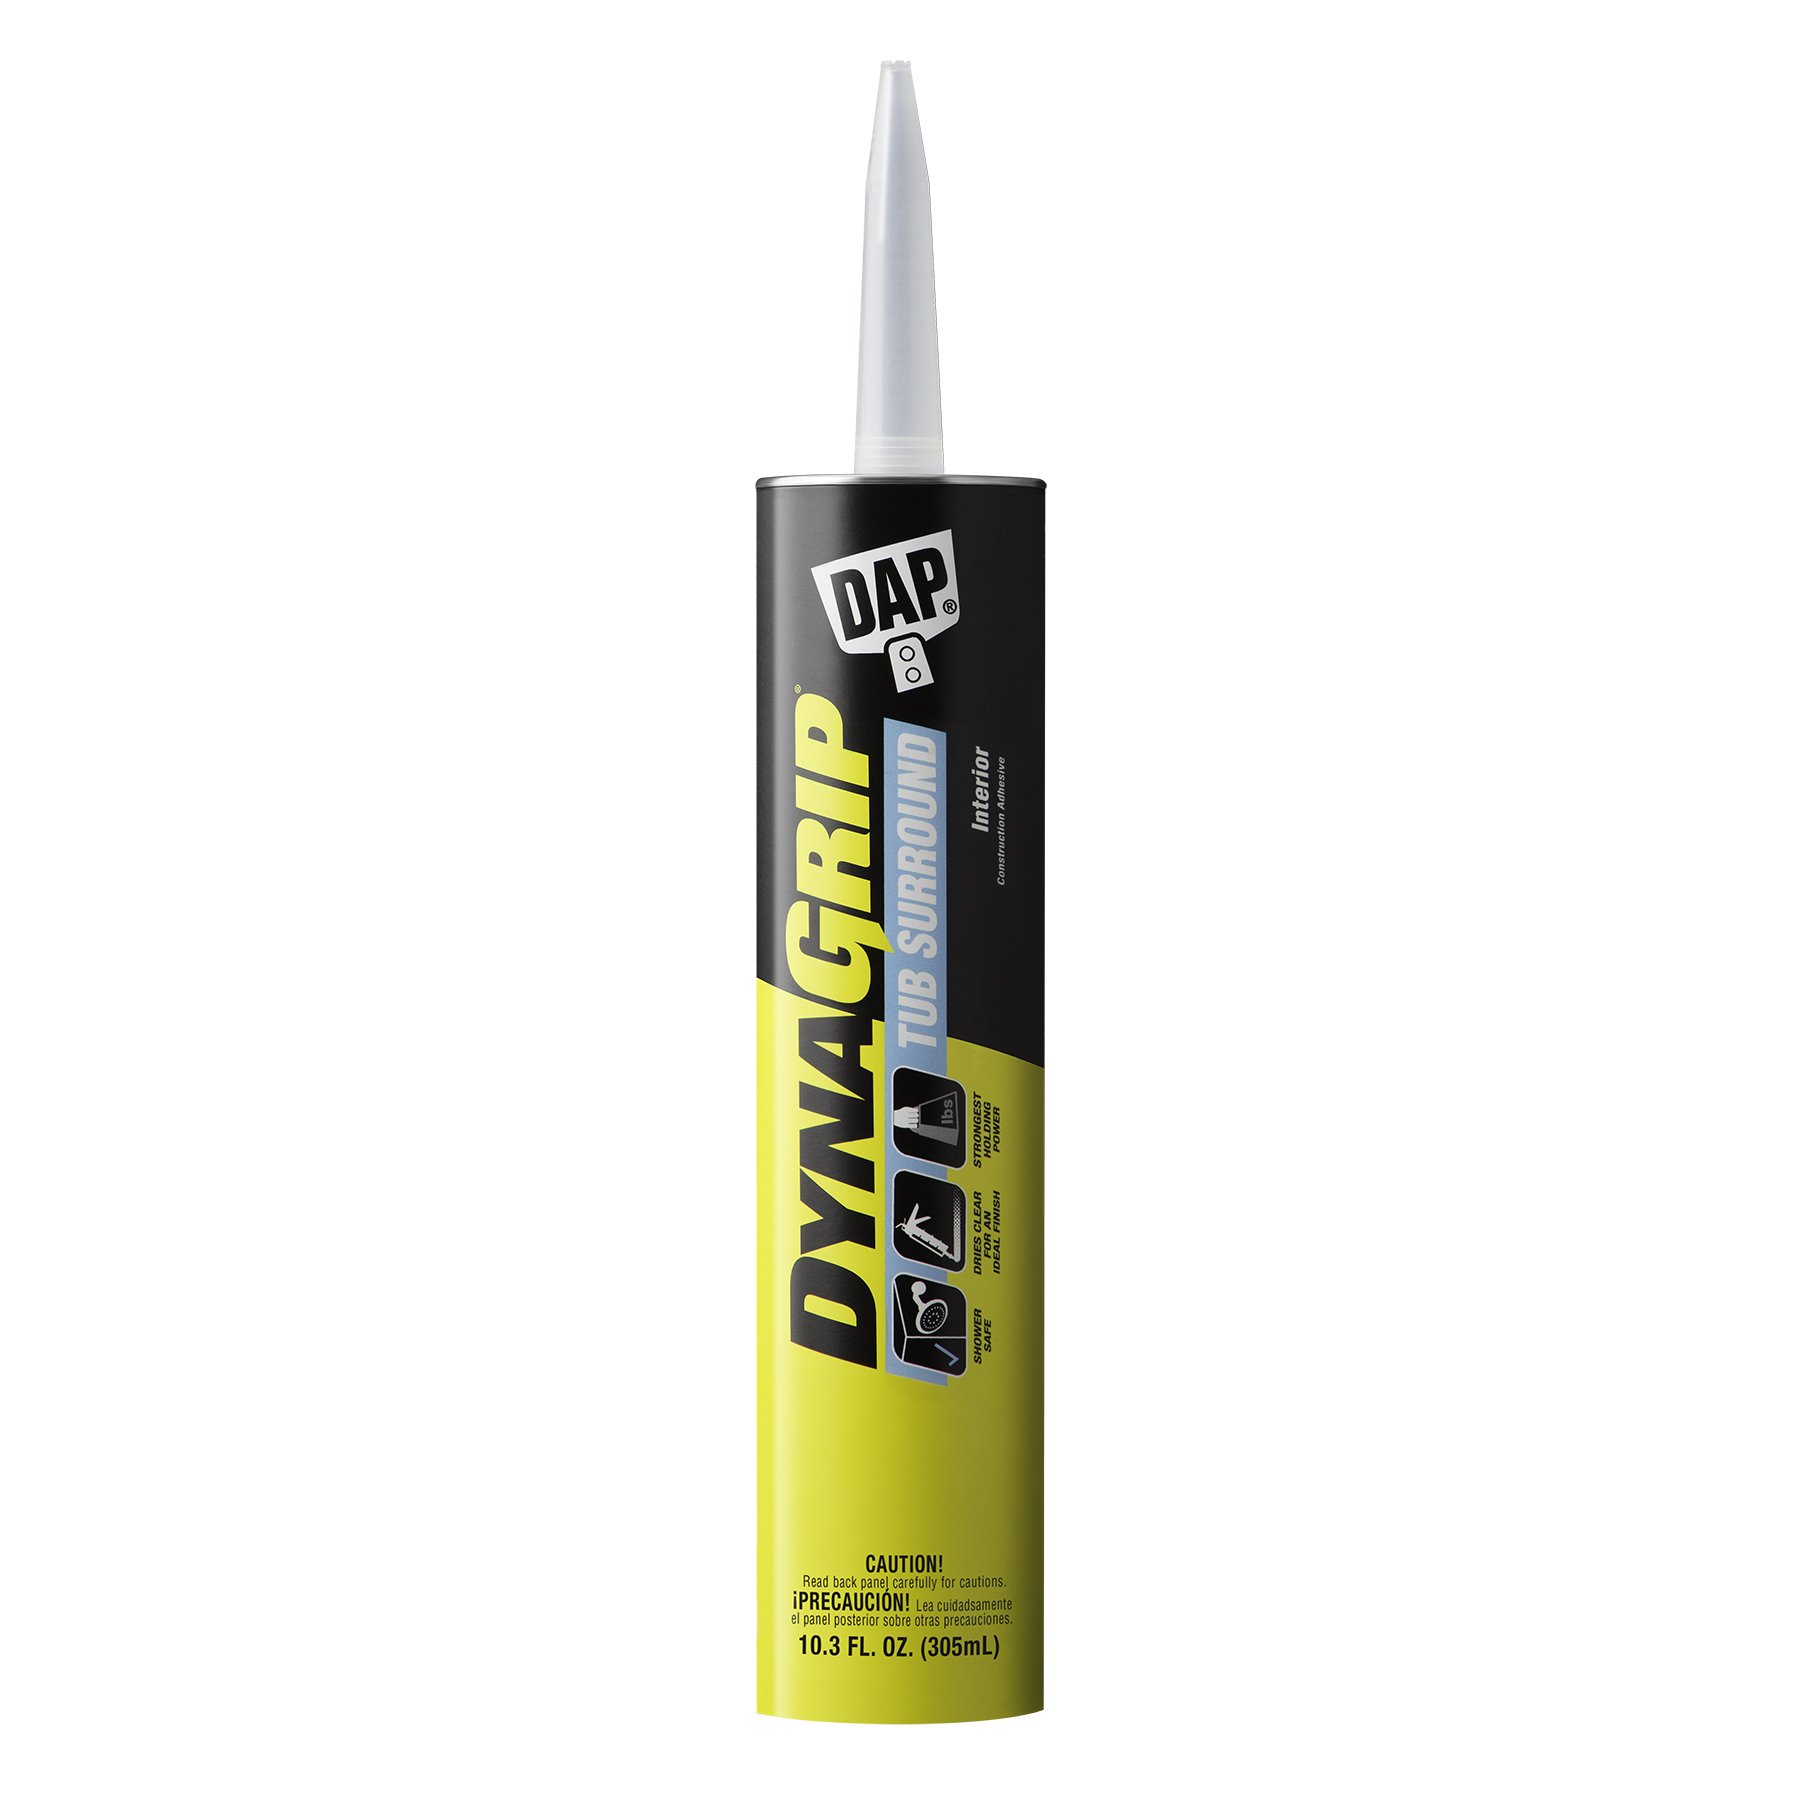 Dynagrip Tub Surround Construction, Best Adhesive For Tub Surround